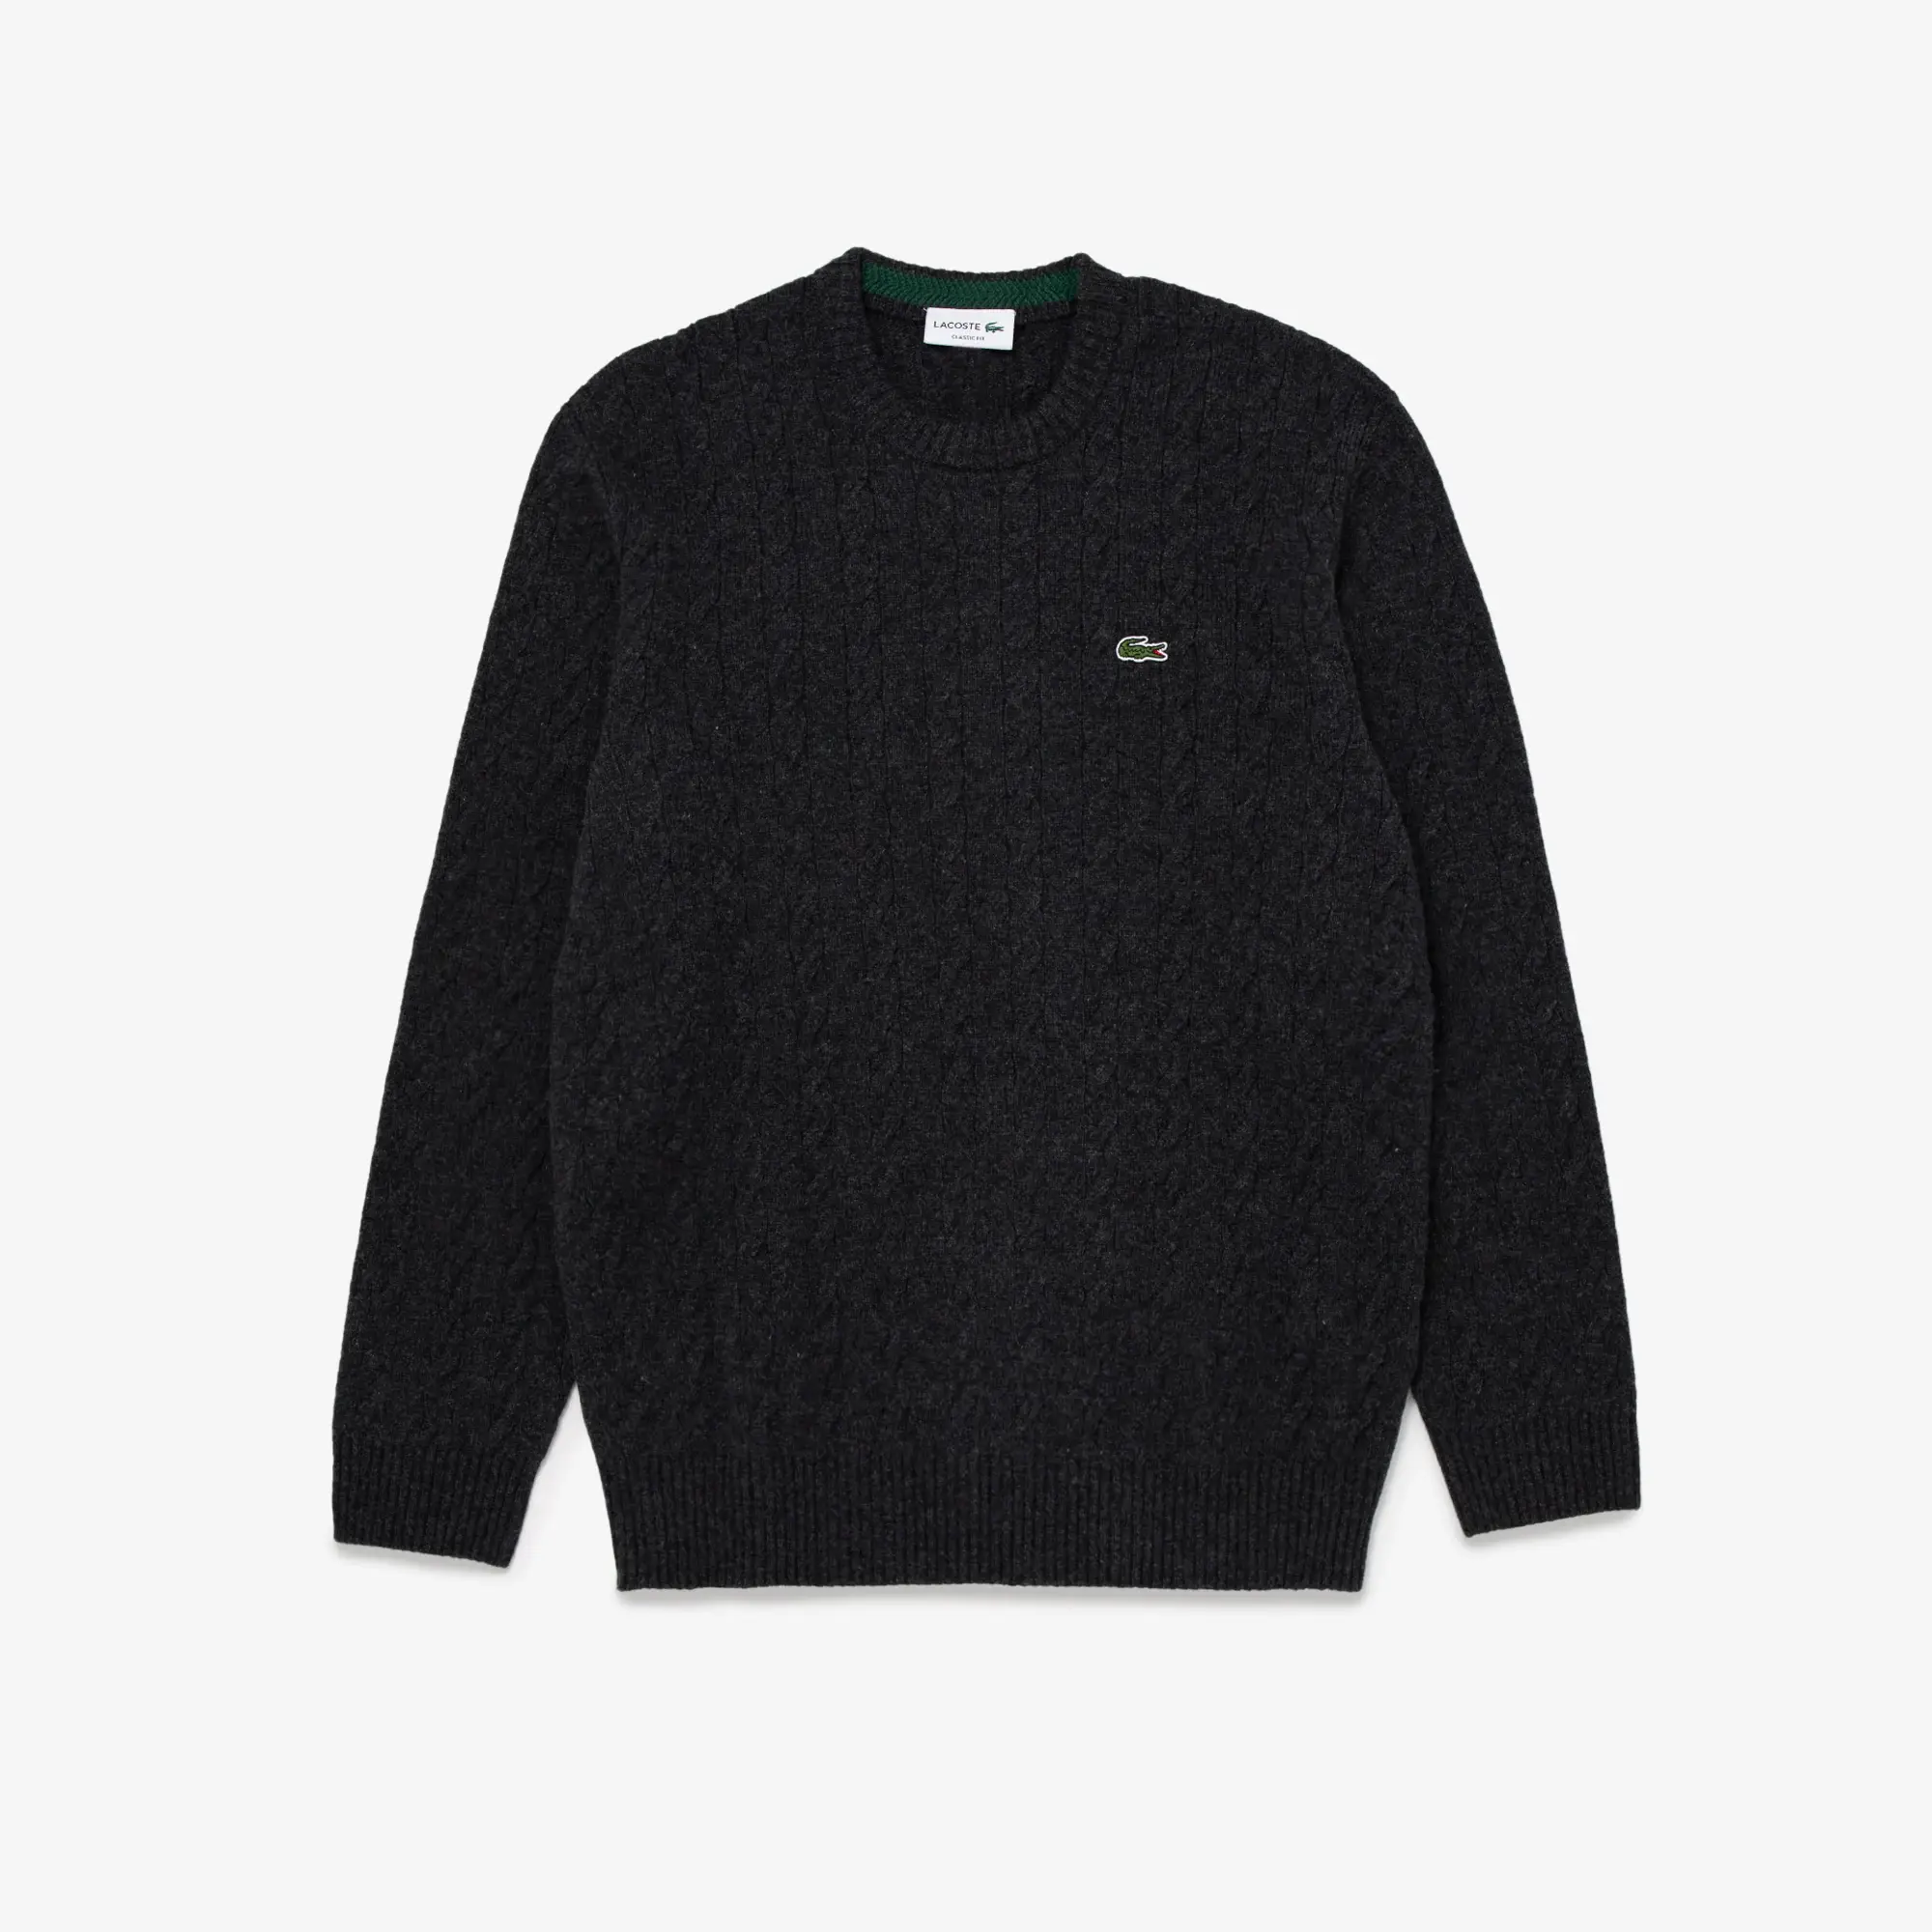 Lacoste Men’s Lacoste Classic Fit Wool Cable Knit Sweater. 1